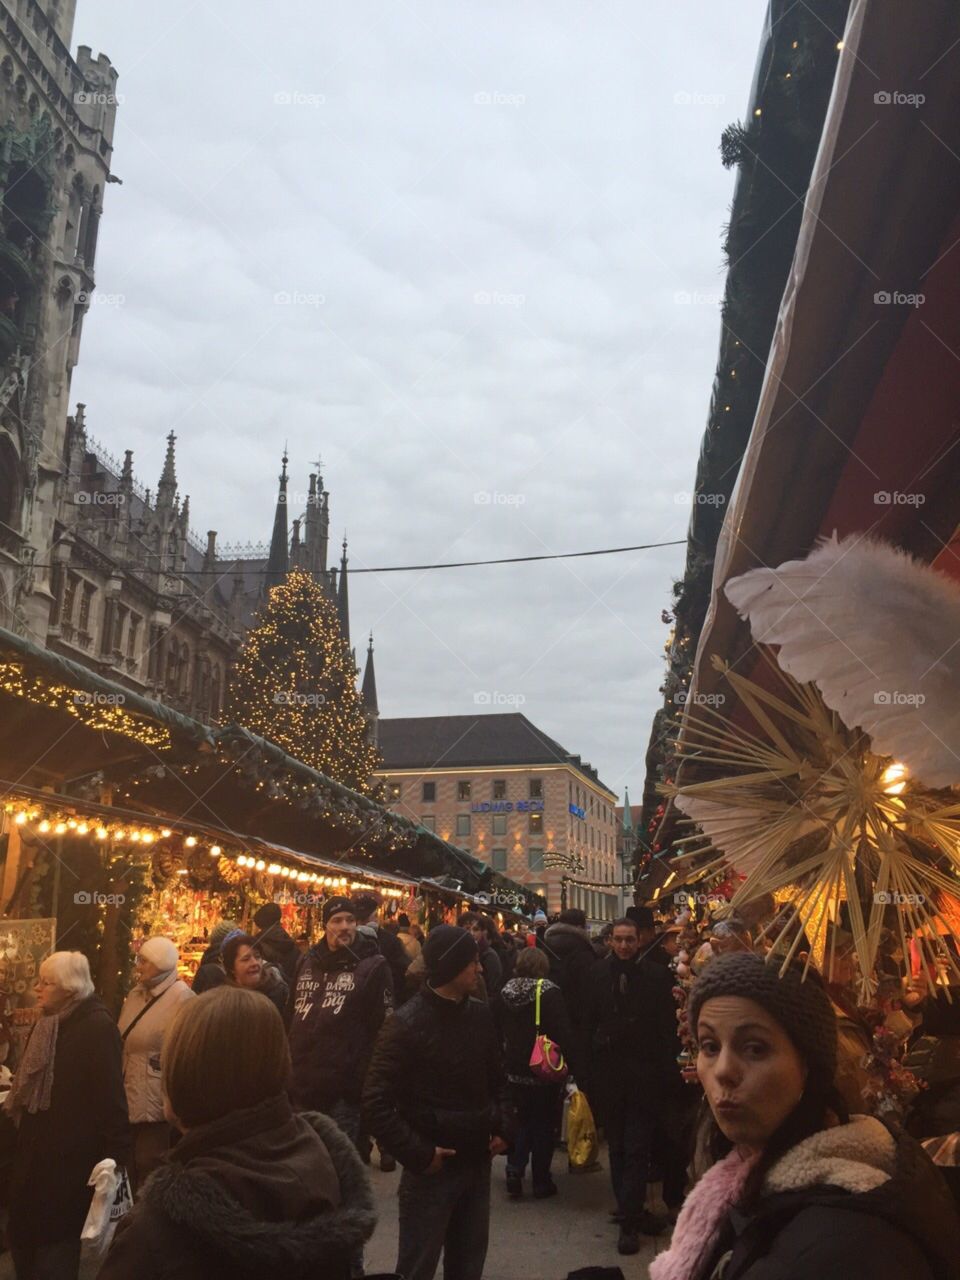 A Christmas market in the centre of Munich, Germany on a cold winter’s day, however it’s a warm environment with the amount of people present.